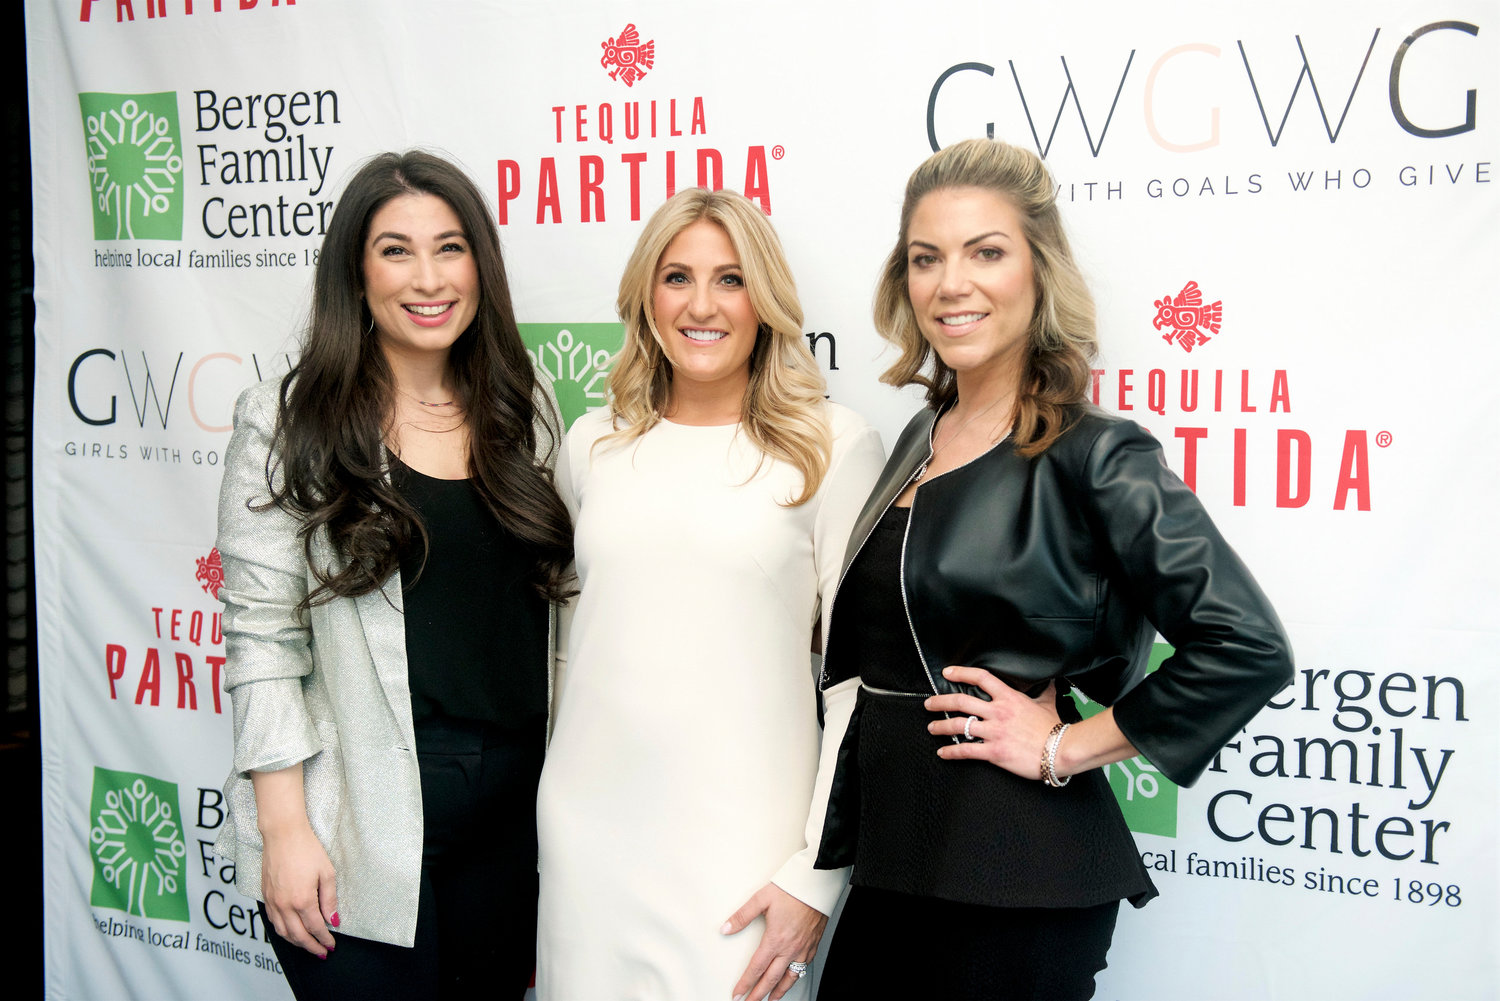 Girls With Goals Who Give aims to get women entrepreneurs networking and help local charities. From left were Hewlett High School alumna Stephanie Paradiso and co-founders Lisa Friesel and Lawrence High School graduate Amanda Hall.